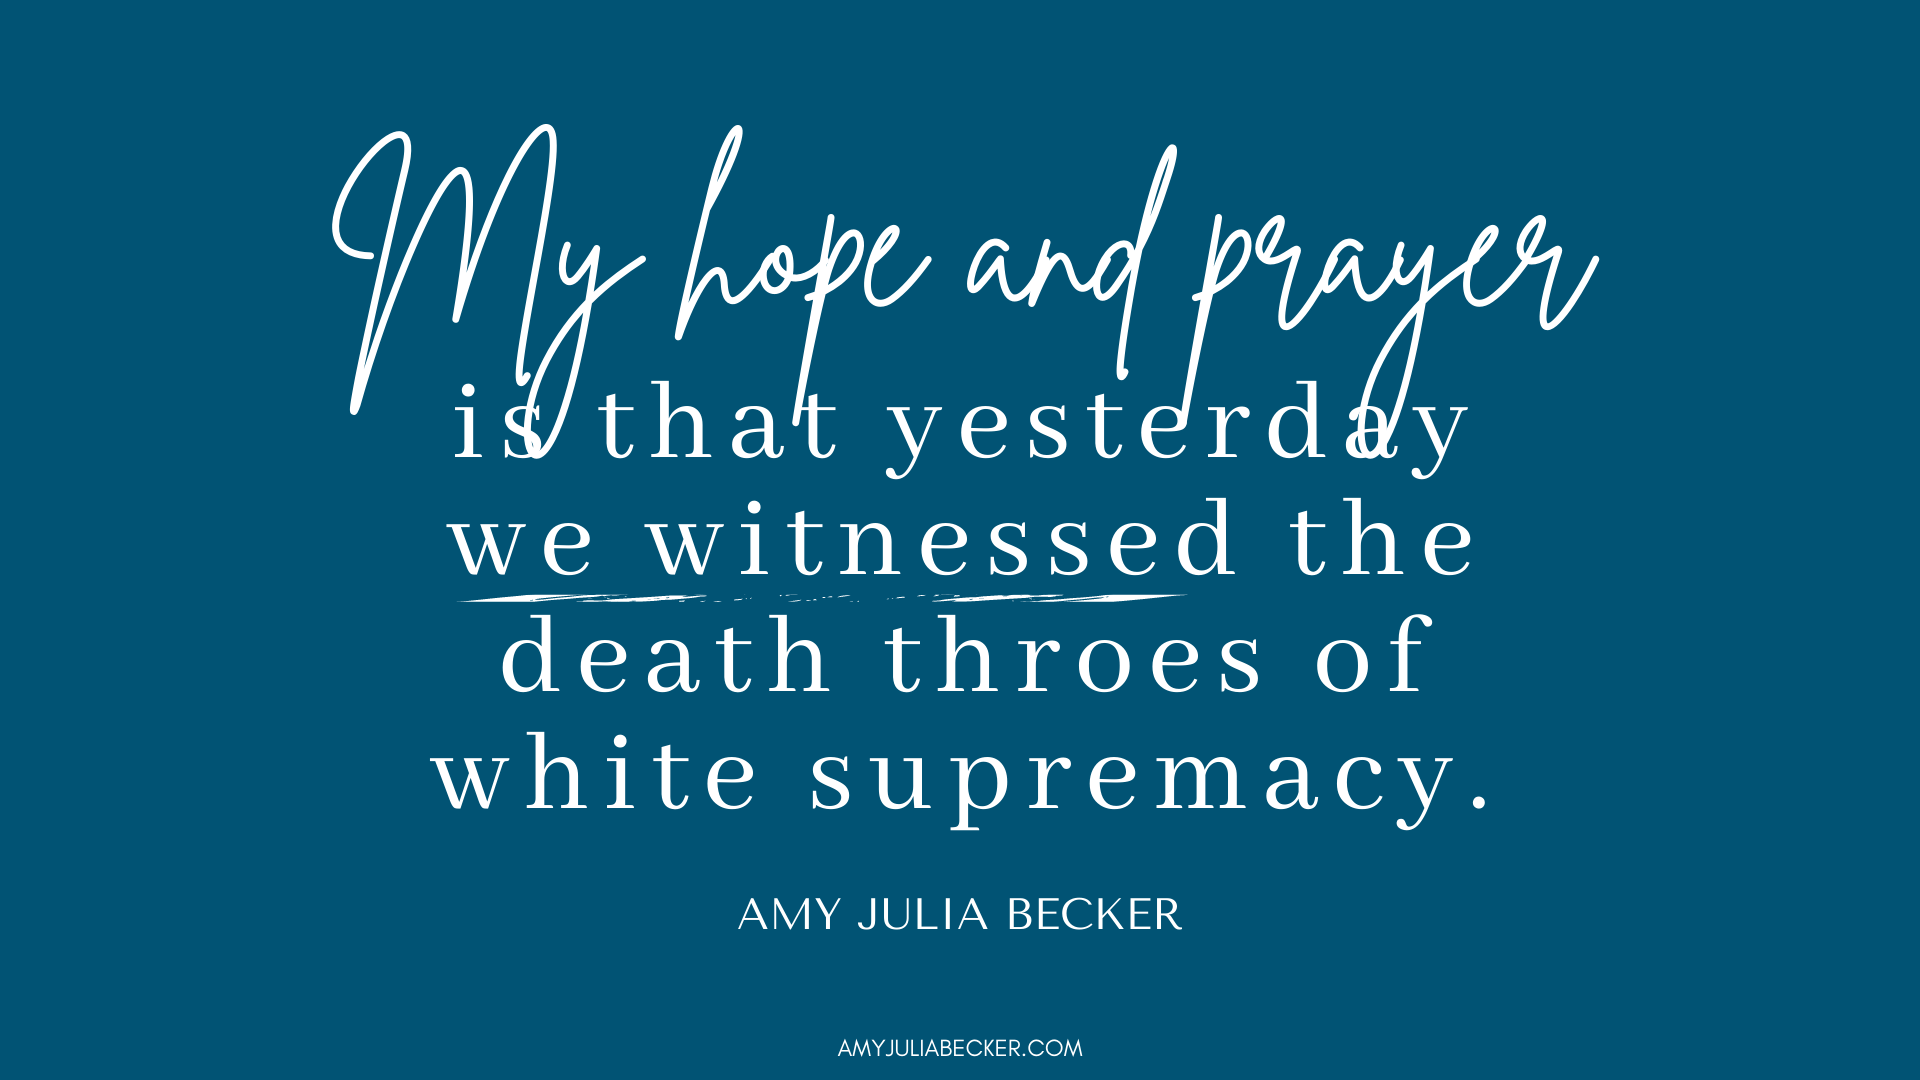 graphics that says, "My hope and prayer is that yesterday we witnessed the death throes of white supremacy."